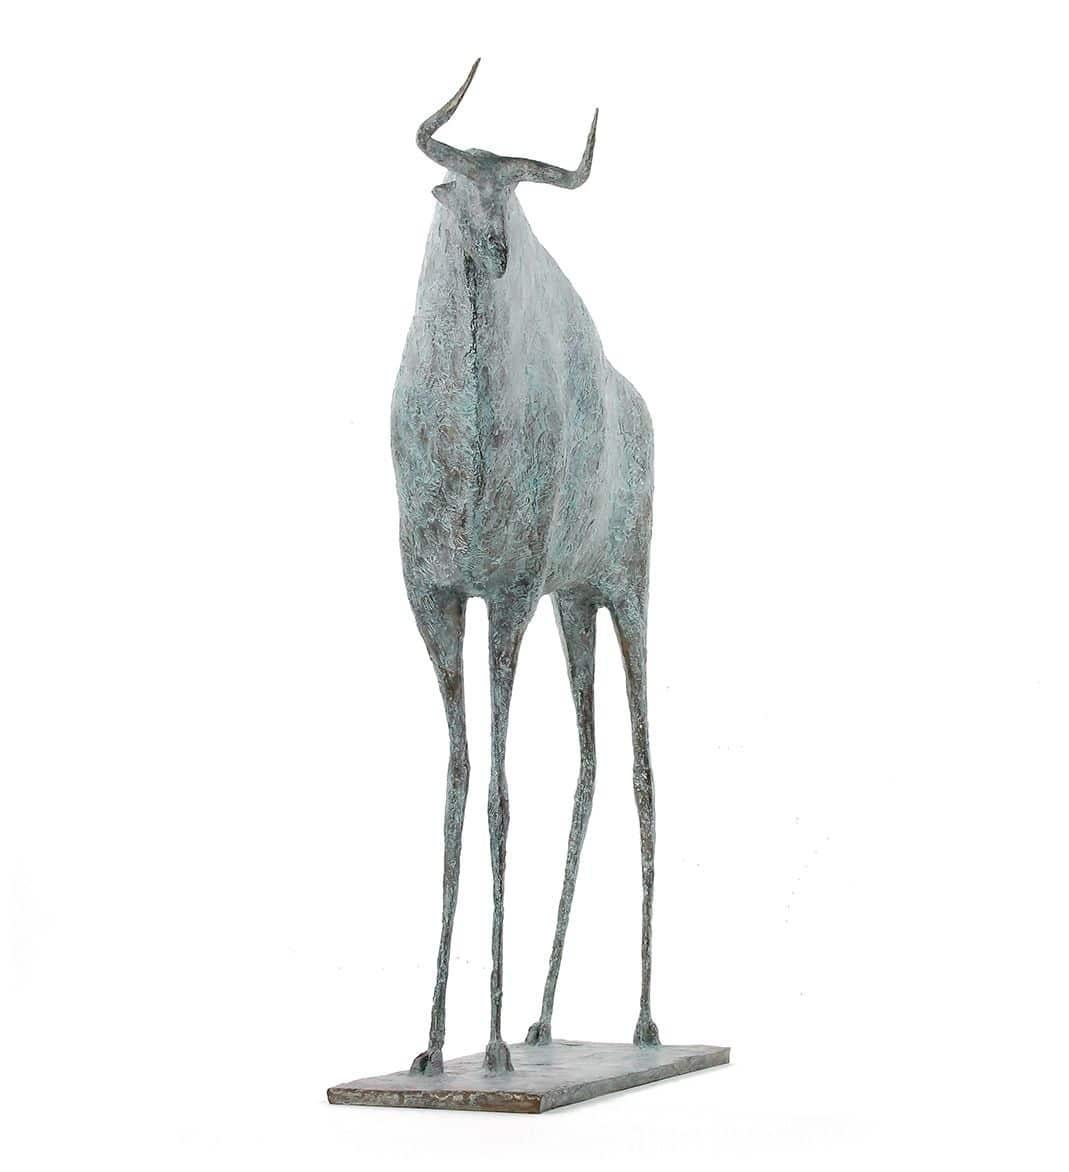 Bull VIII is a bronze sculpture by French contemporary artist Pierre Yermia, dimensions are 73 × 58 × 17 cm (28.7 × 22.8 × 6.7 in). 
The sculpture is signed and numbered, it is part of a limited edition of 8 editions + 4 artist’s proofs, and comes